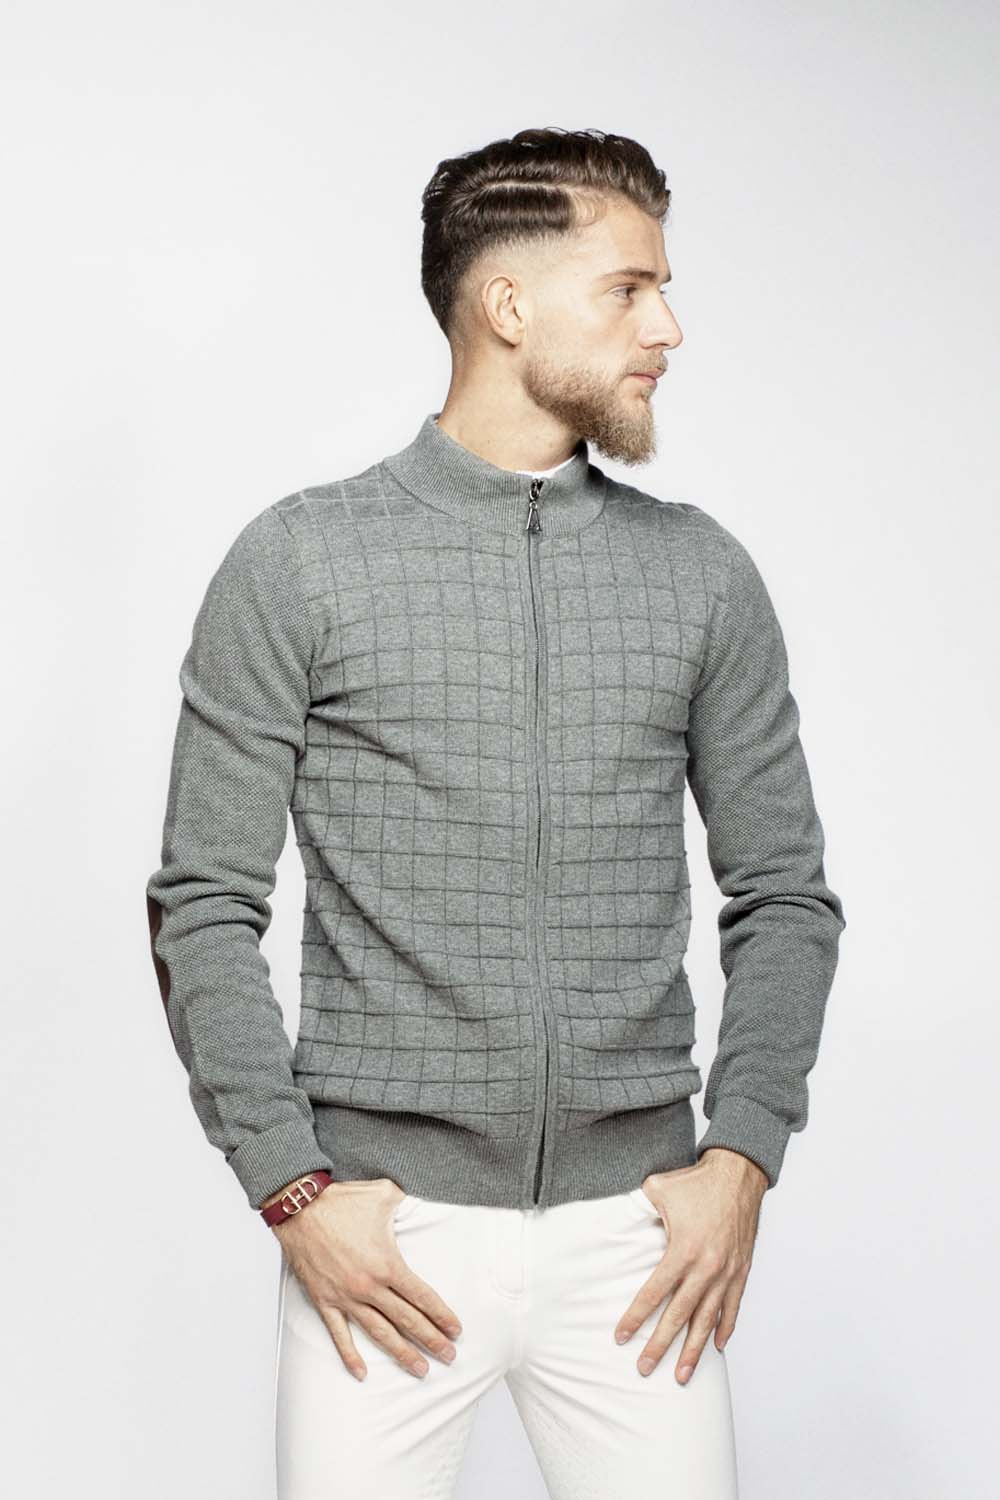 Men's sweater made of cotton with zipper